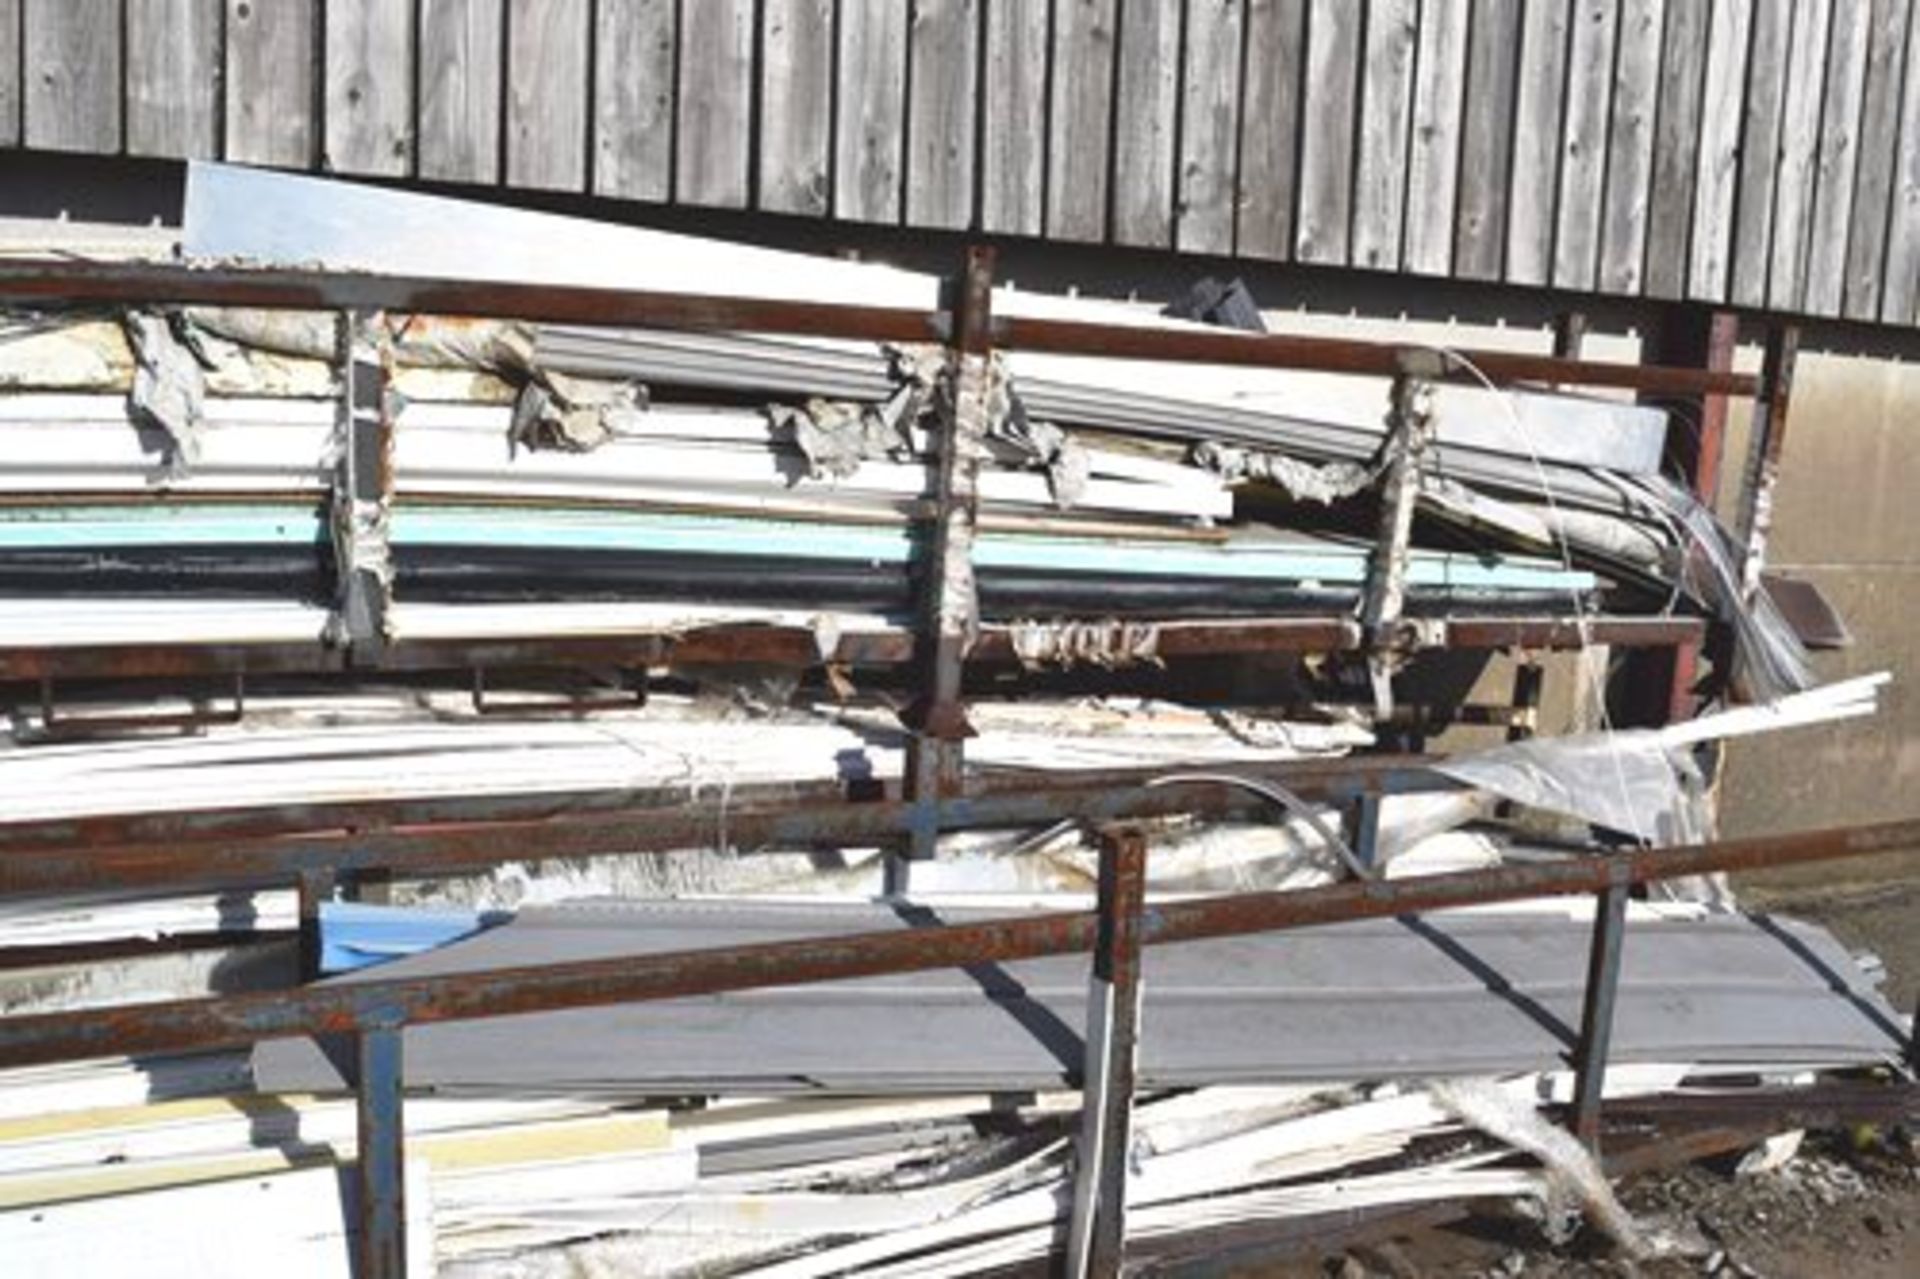 Assorted modern plastic profiles, pipe, facia's etc - open store (yard rear) - Image 12 of 13